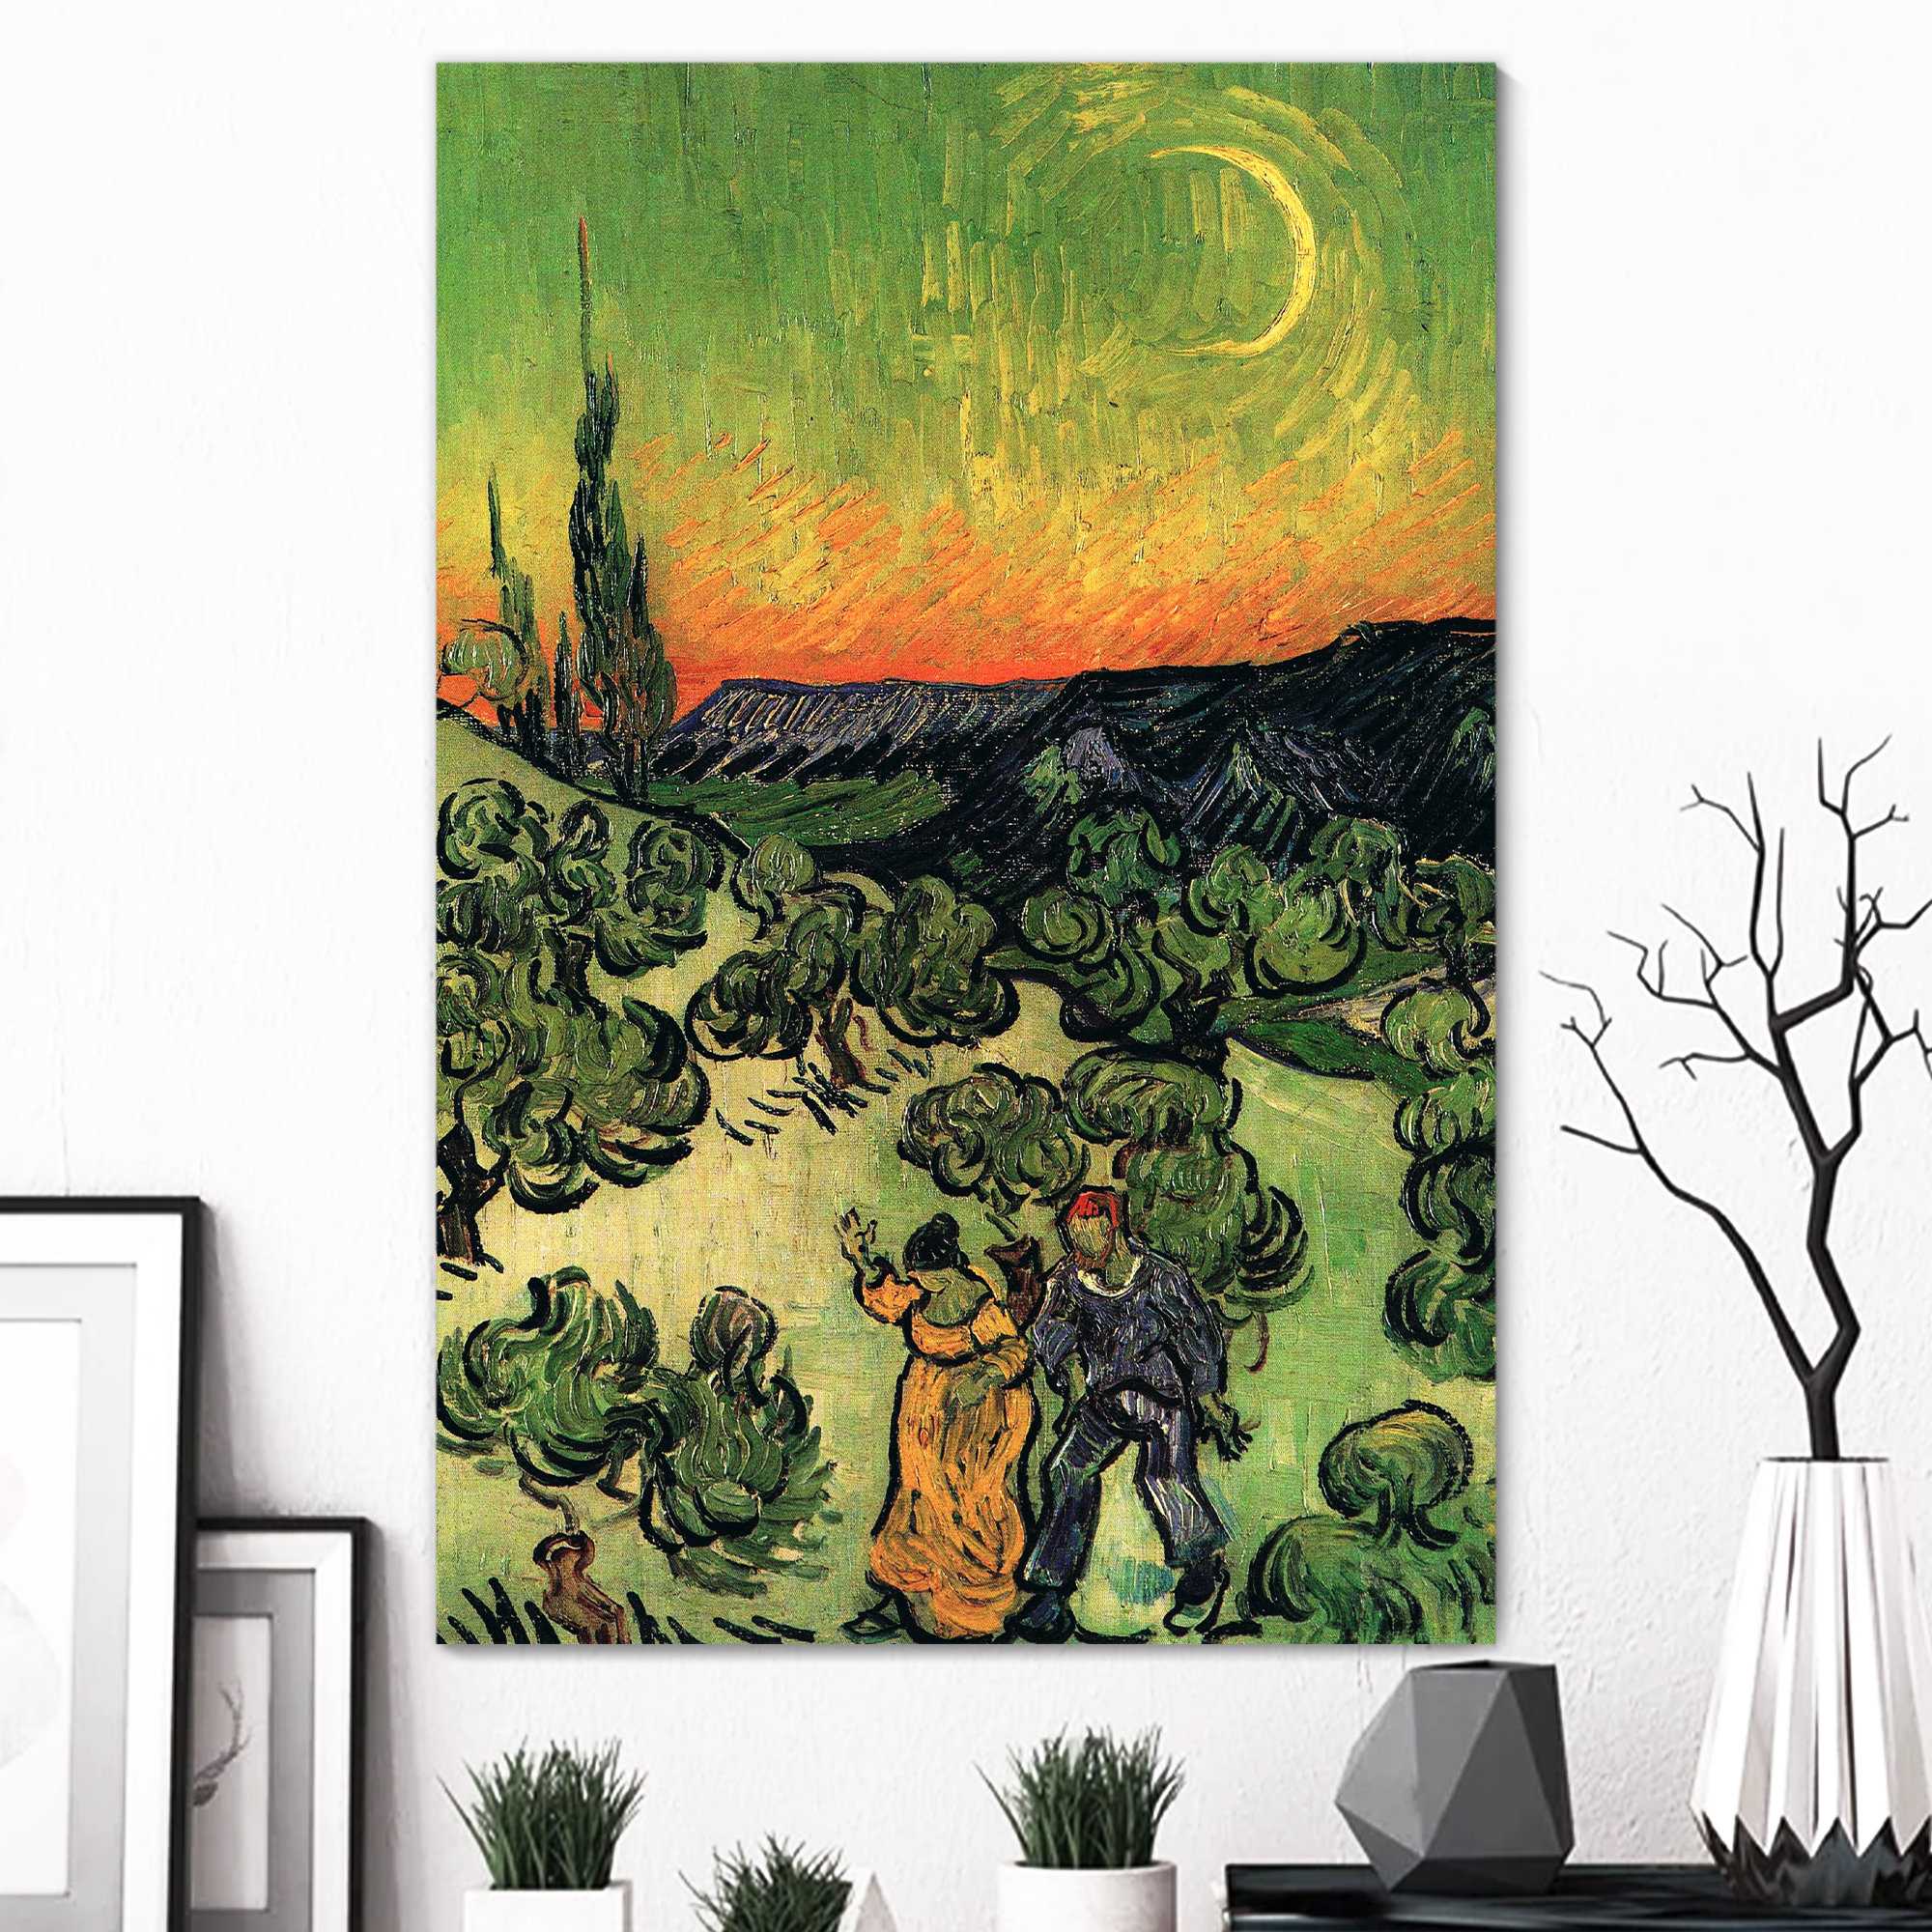 Landscape with Couple Walking and Crescent Moon by Vincent Van Gogh - Canvas Print Wall Art Famous Painting Reproduction - 32